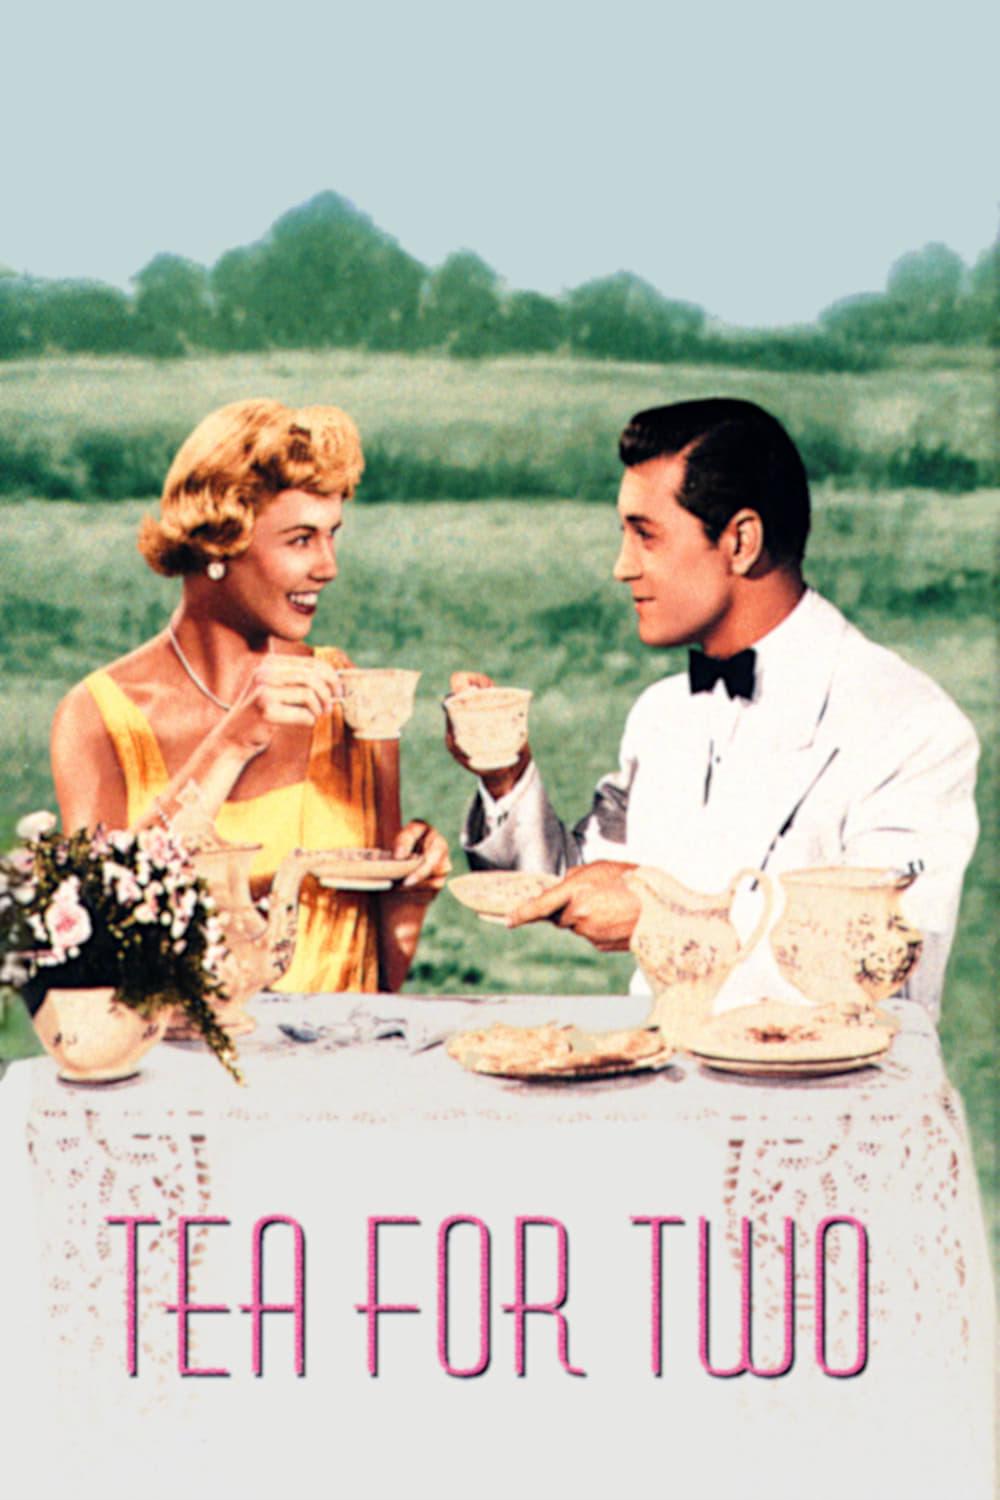 Tea for Two poster